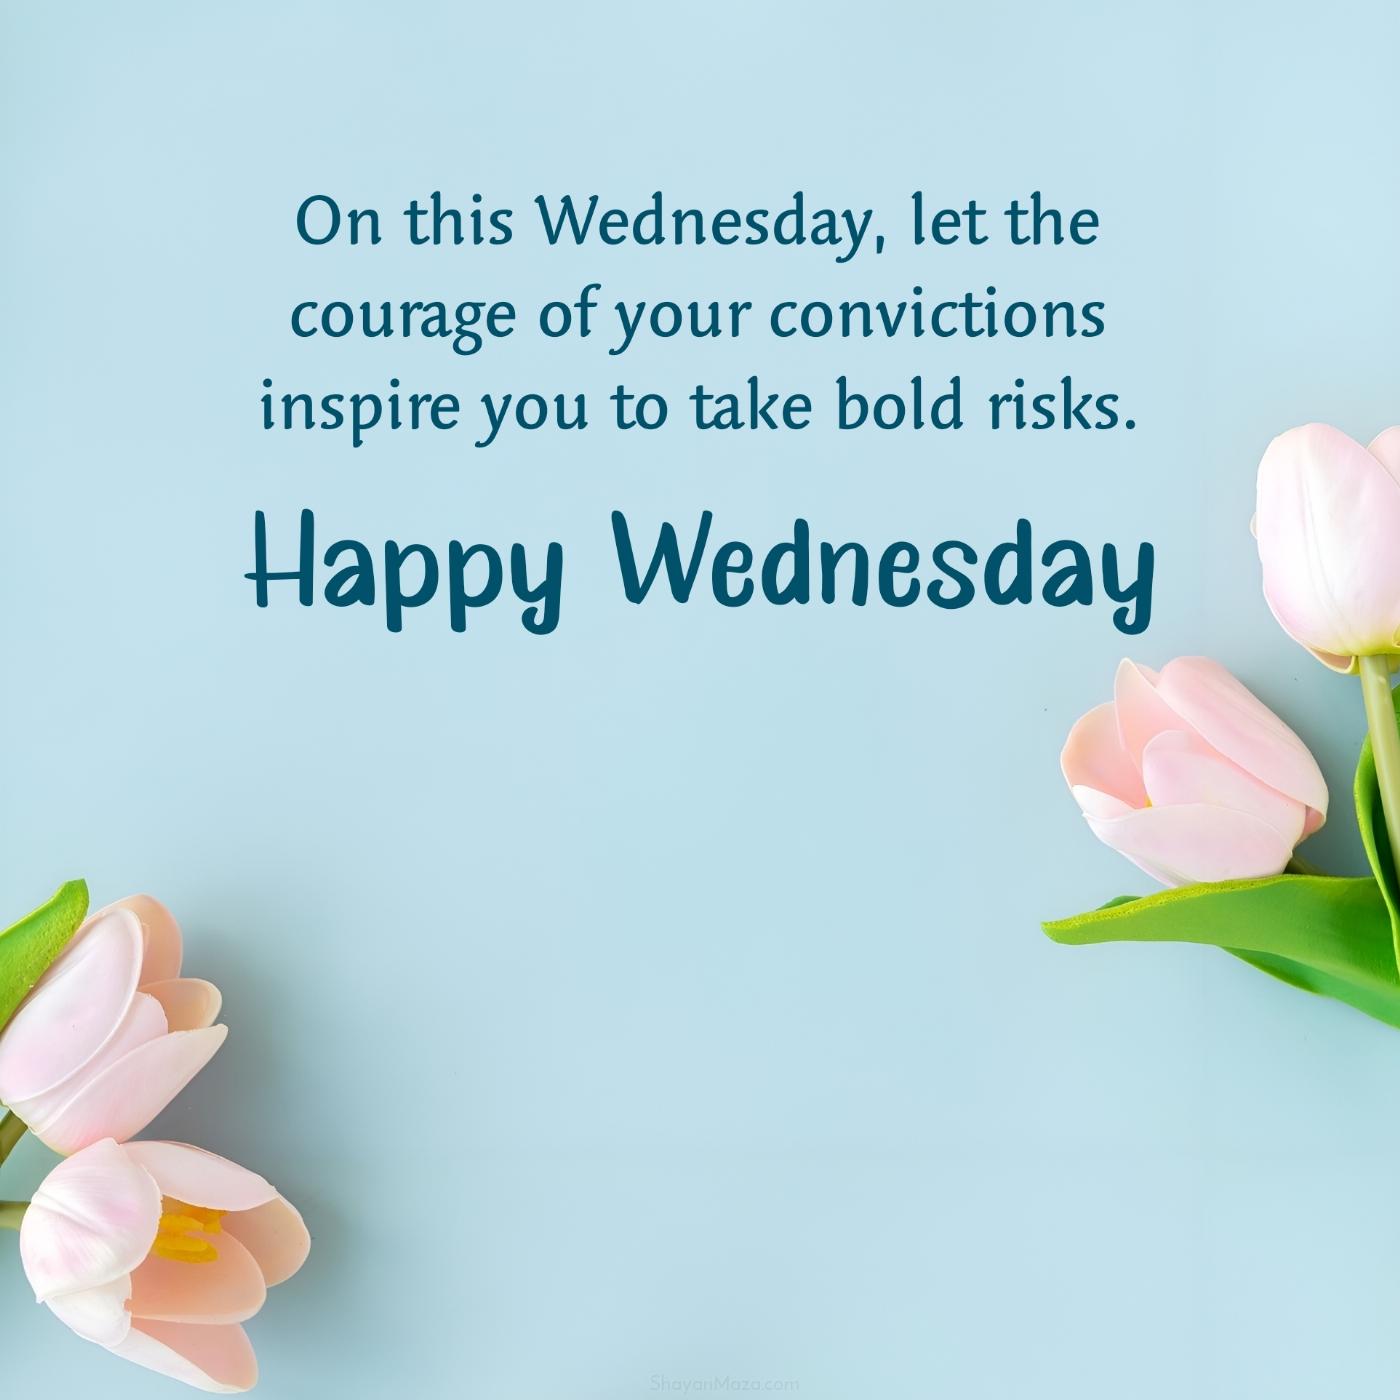 On this Wednesday let the courage of your convictions inspire you